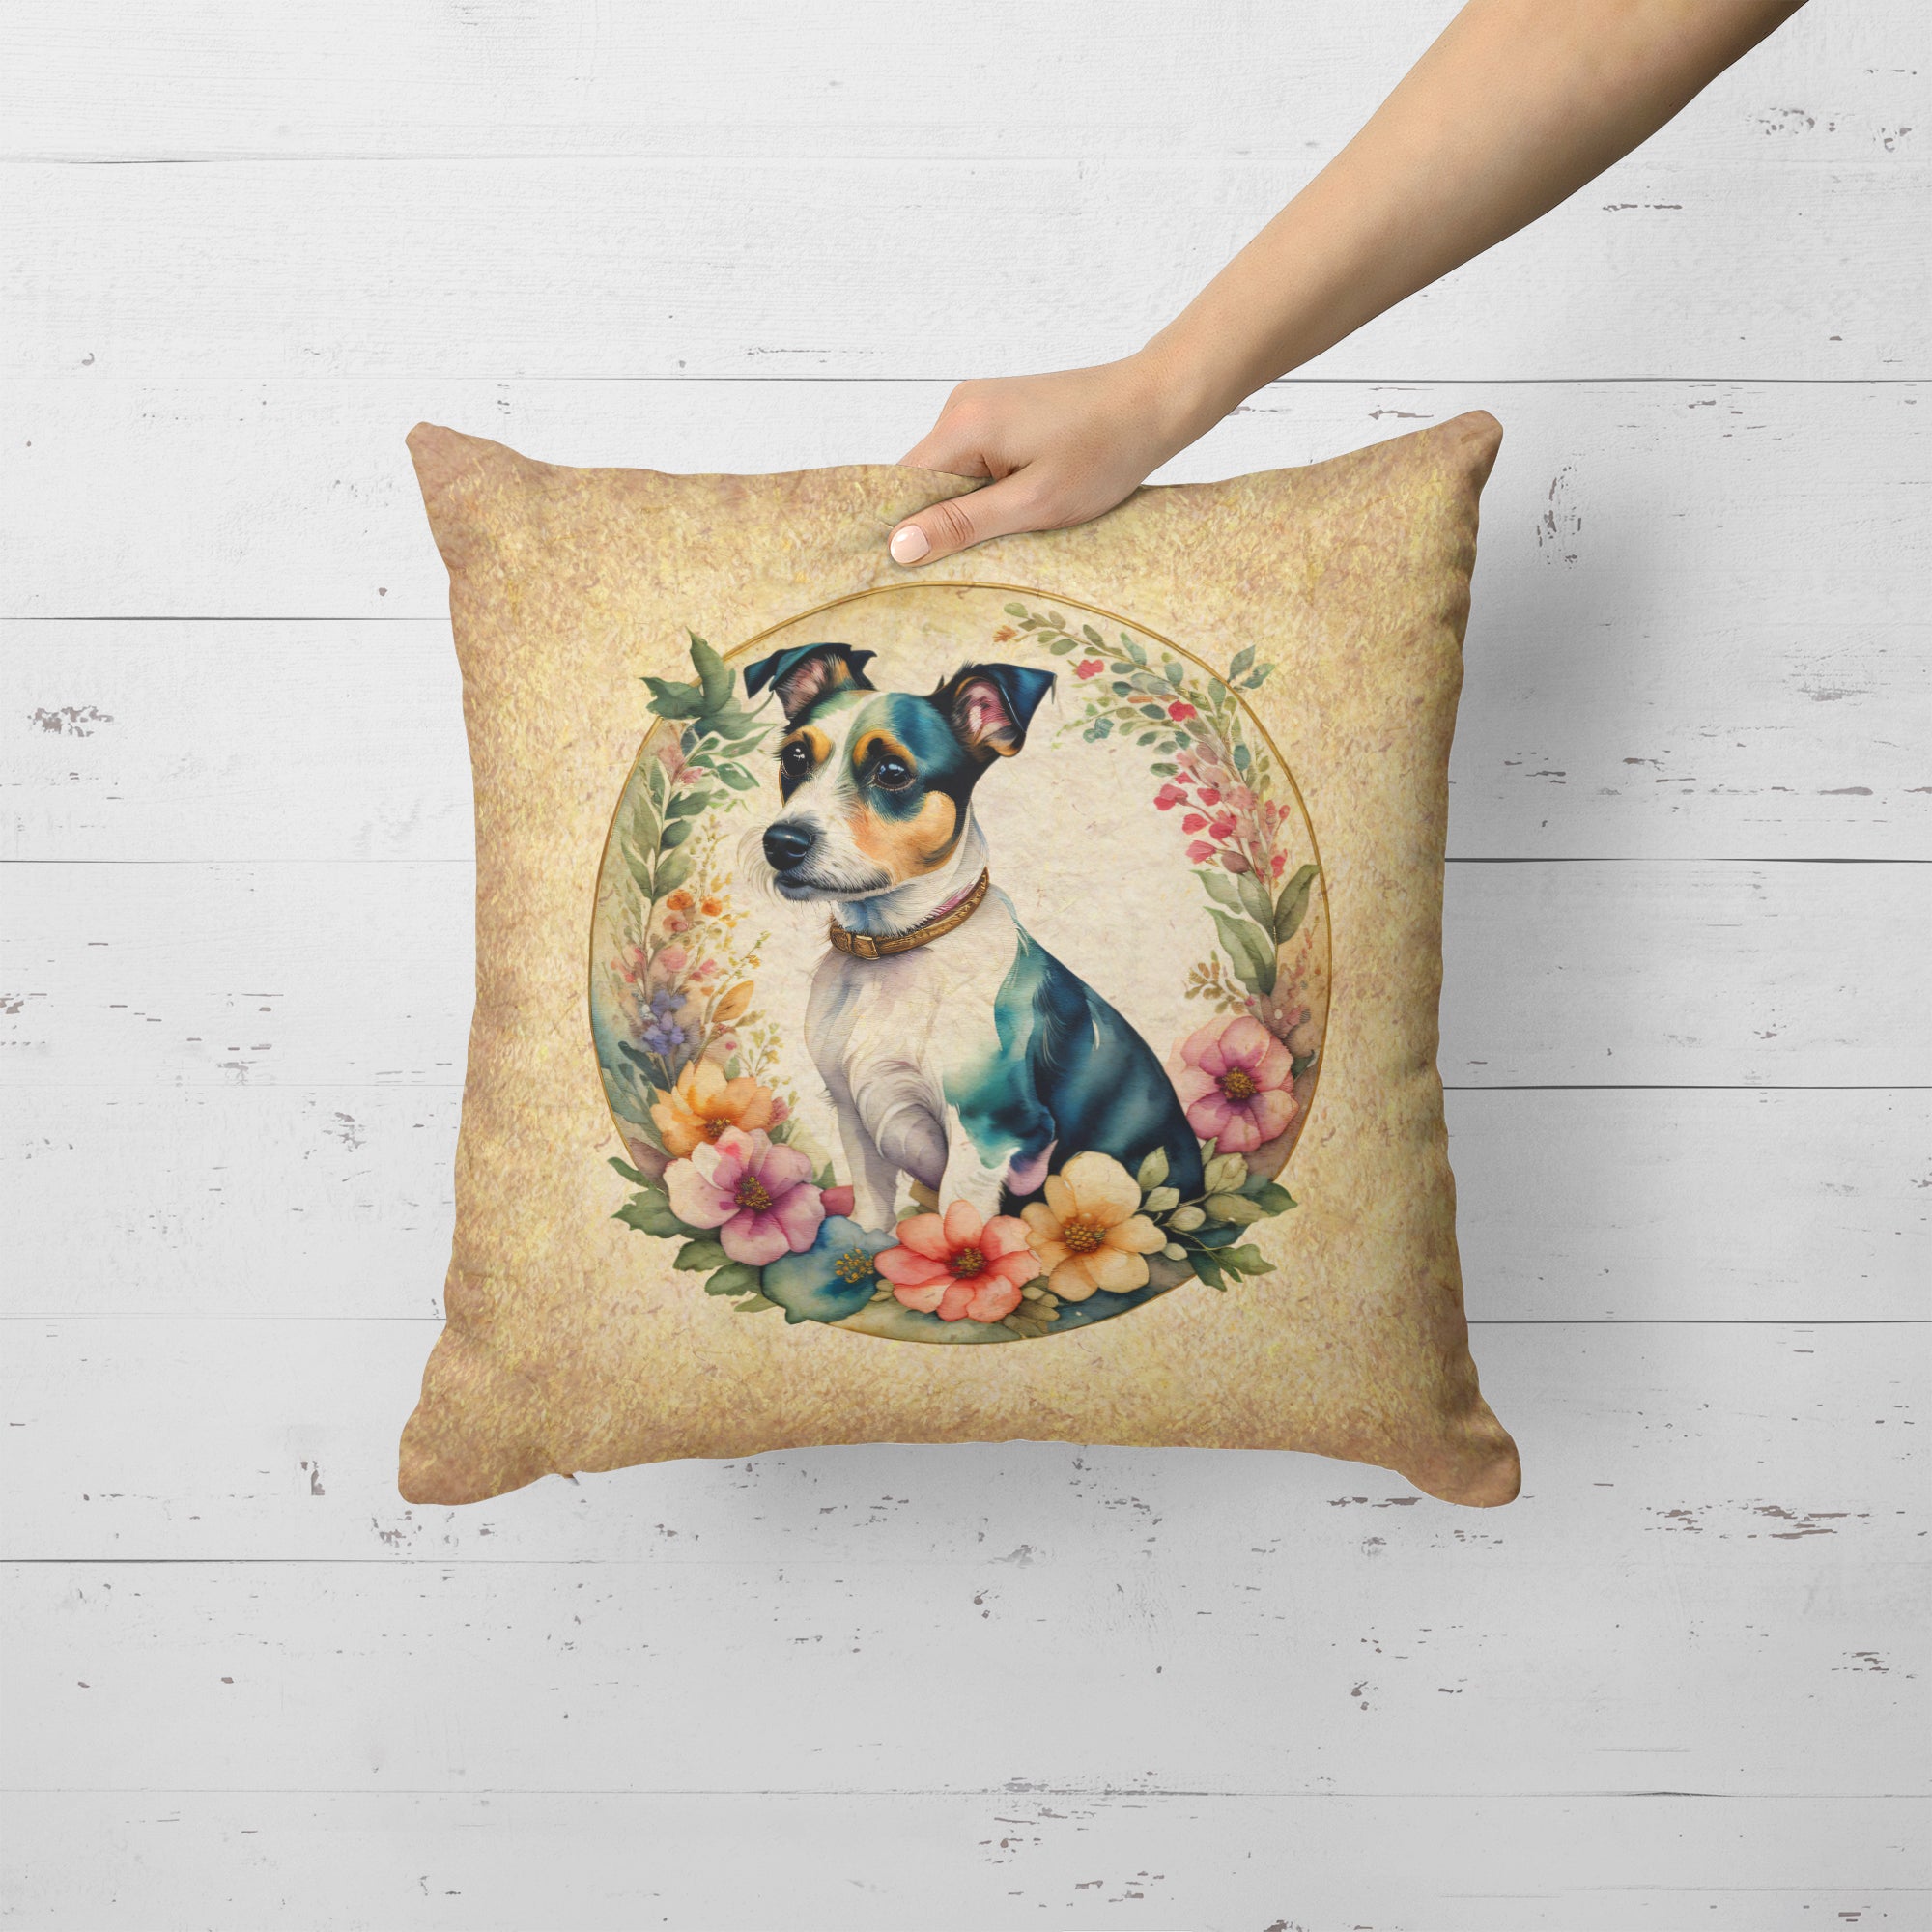 Buy this Jack Russell Terrier and Flowers Fabric Decorative Pillow